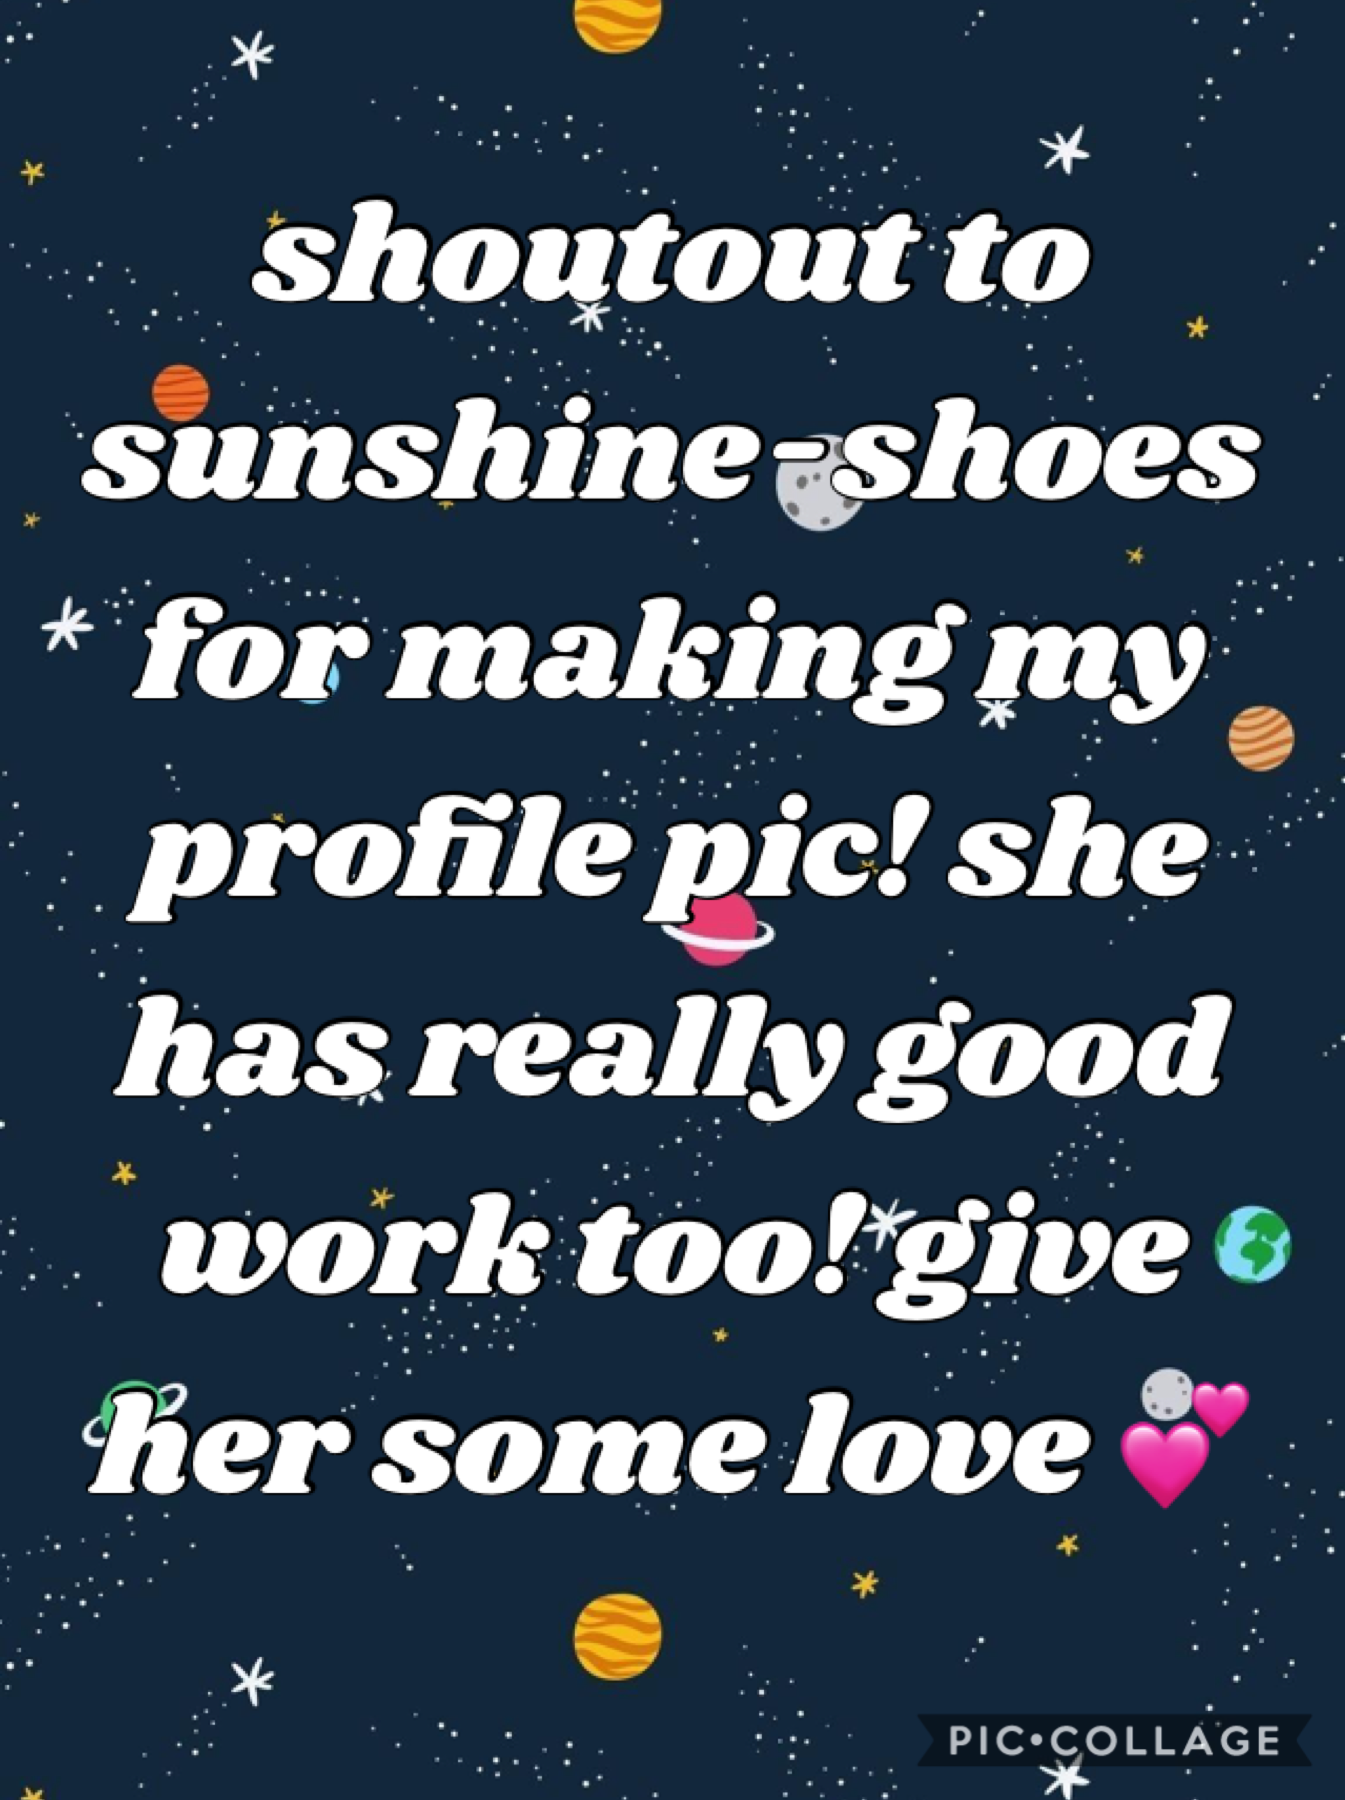 check out sunshine-shoes ☀️